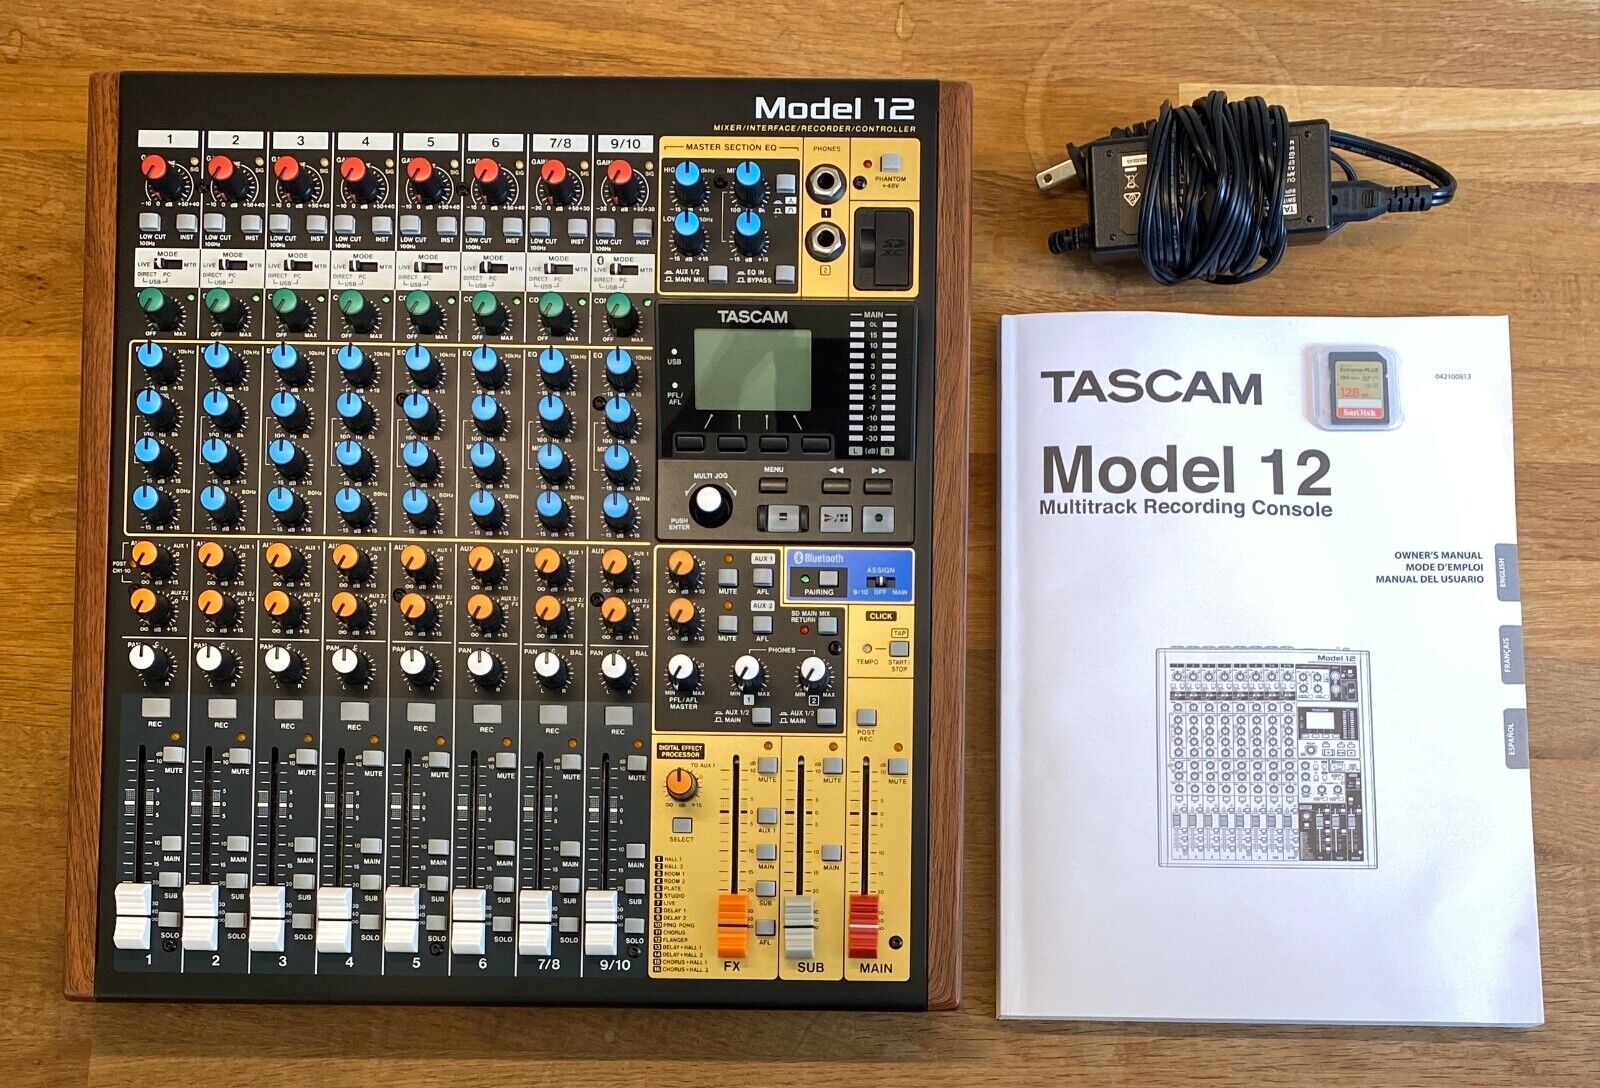 TASCAM Model 12 with SanDisk SDXC 128GB Memory Card